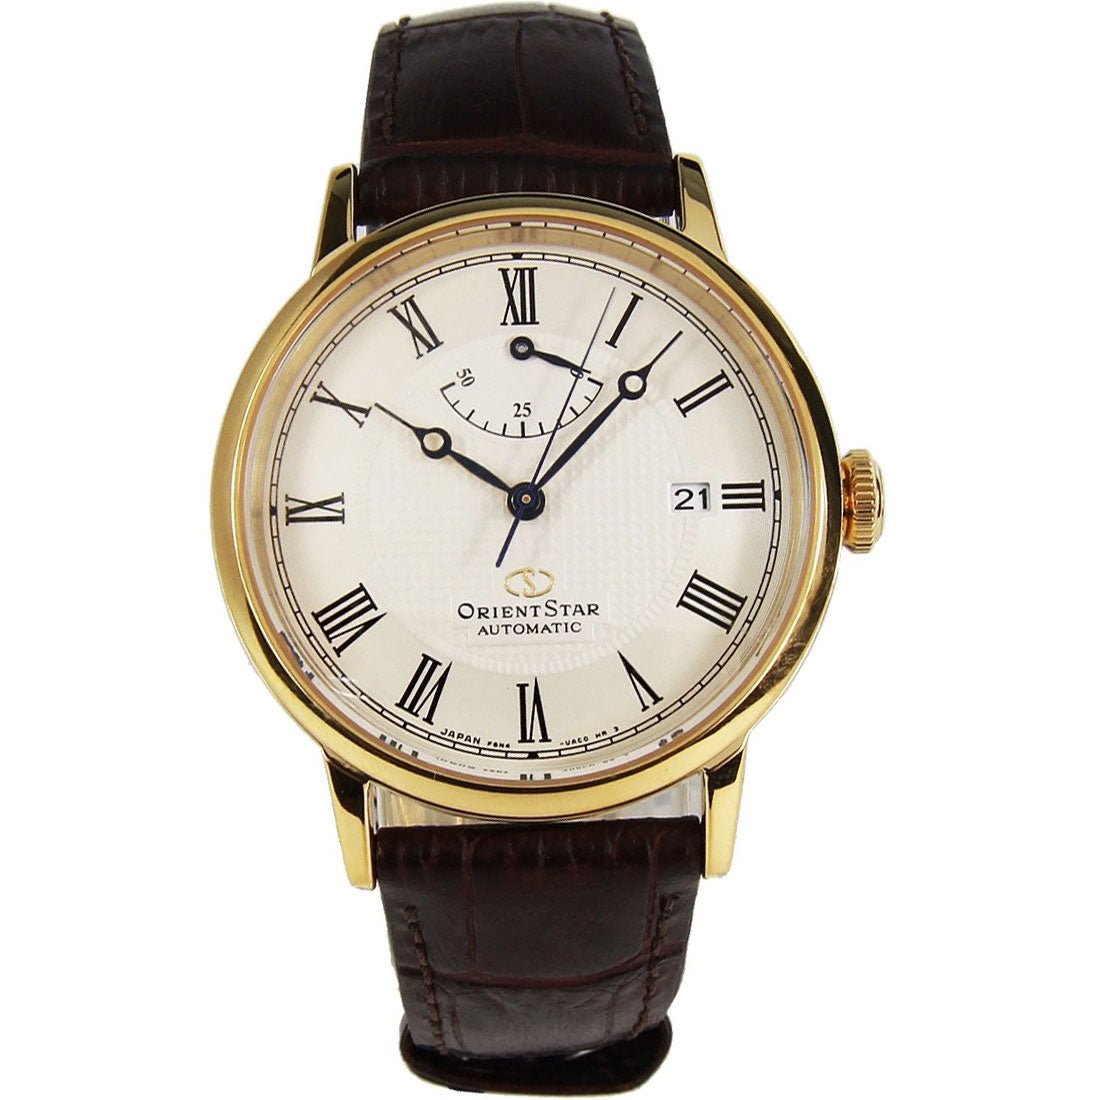 Orient Star RE-AU0001S RE-AU0001S00B Made in Japan Leather Watch -Orient